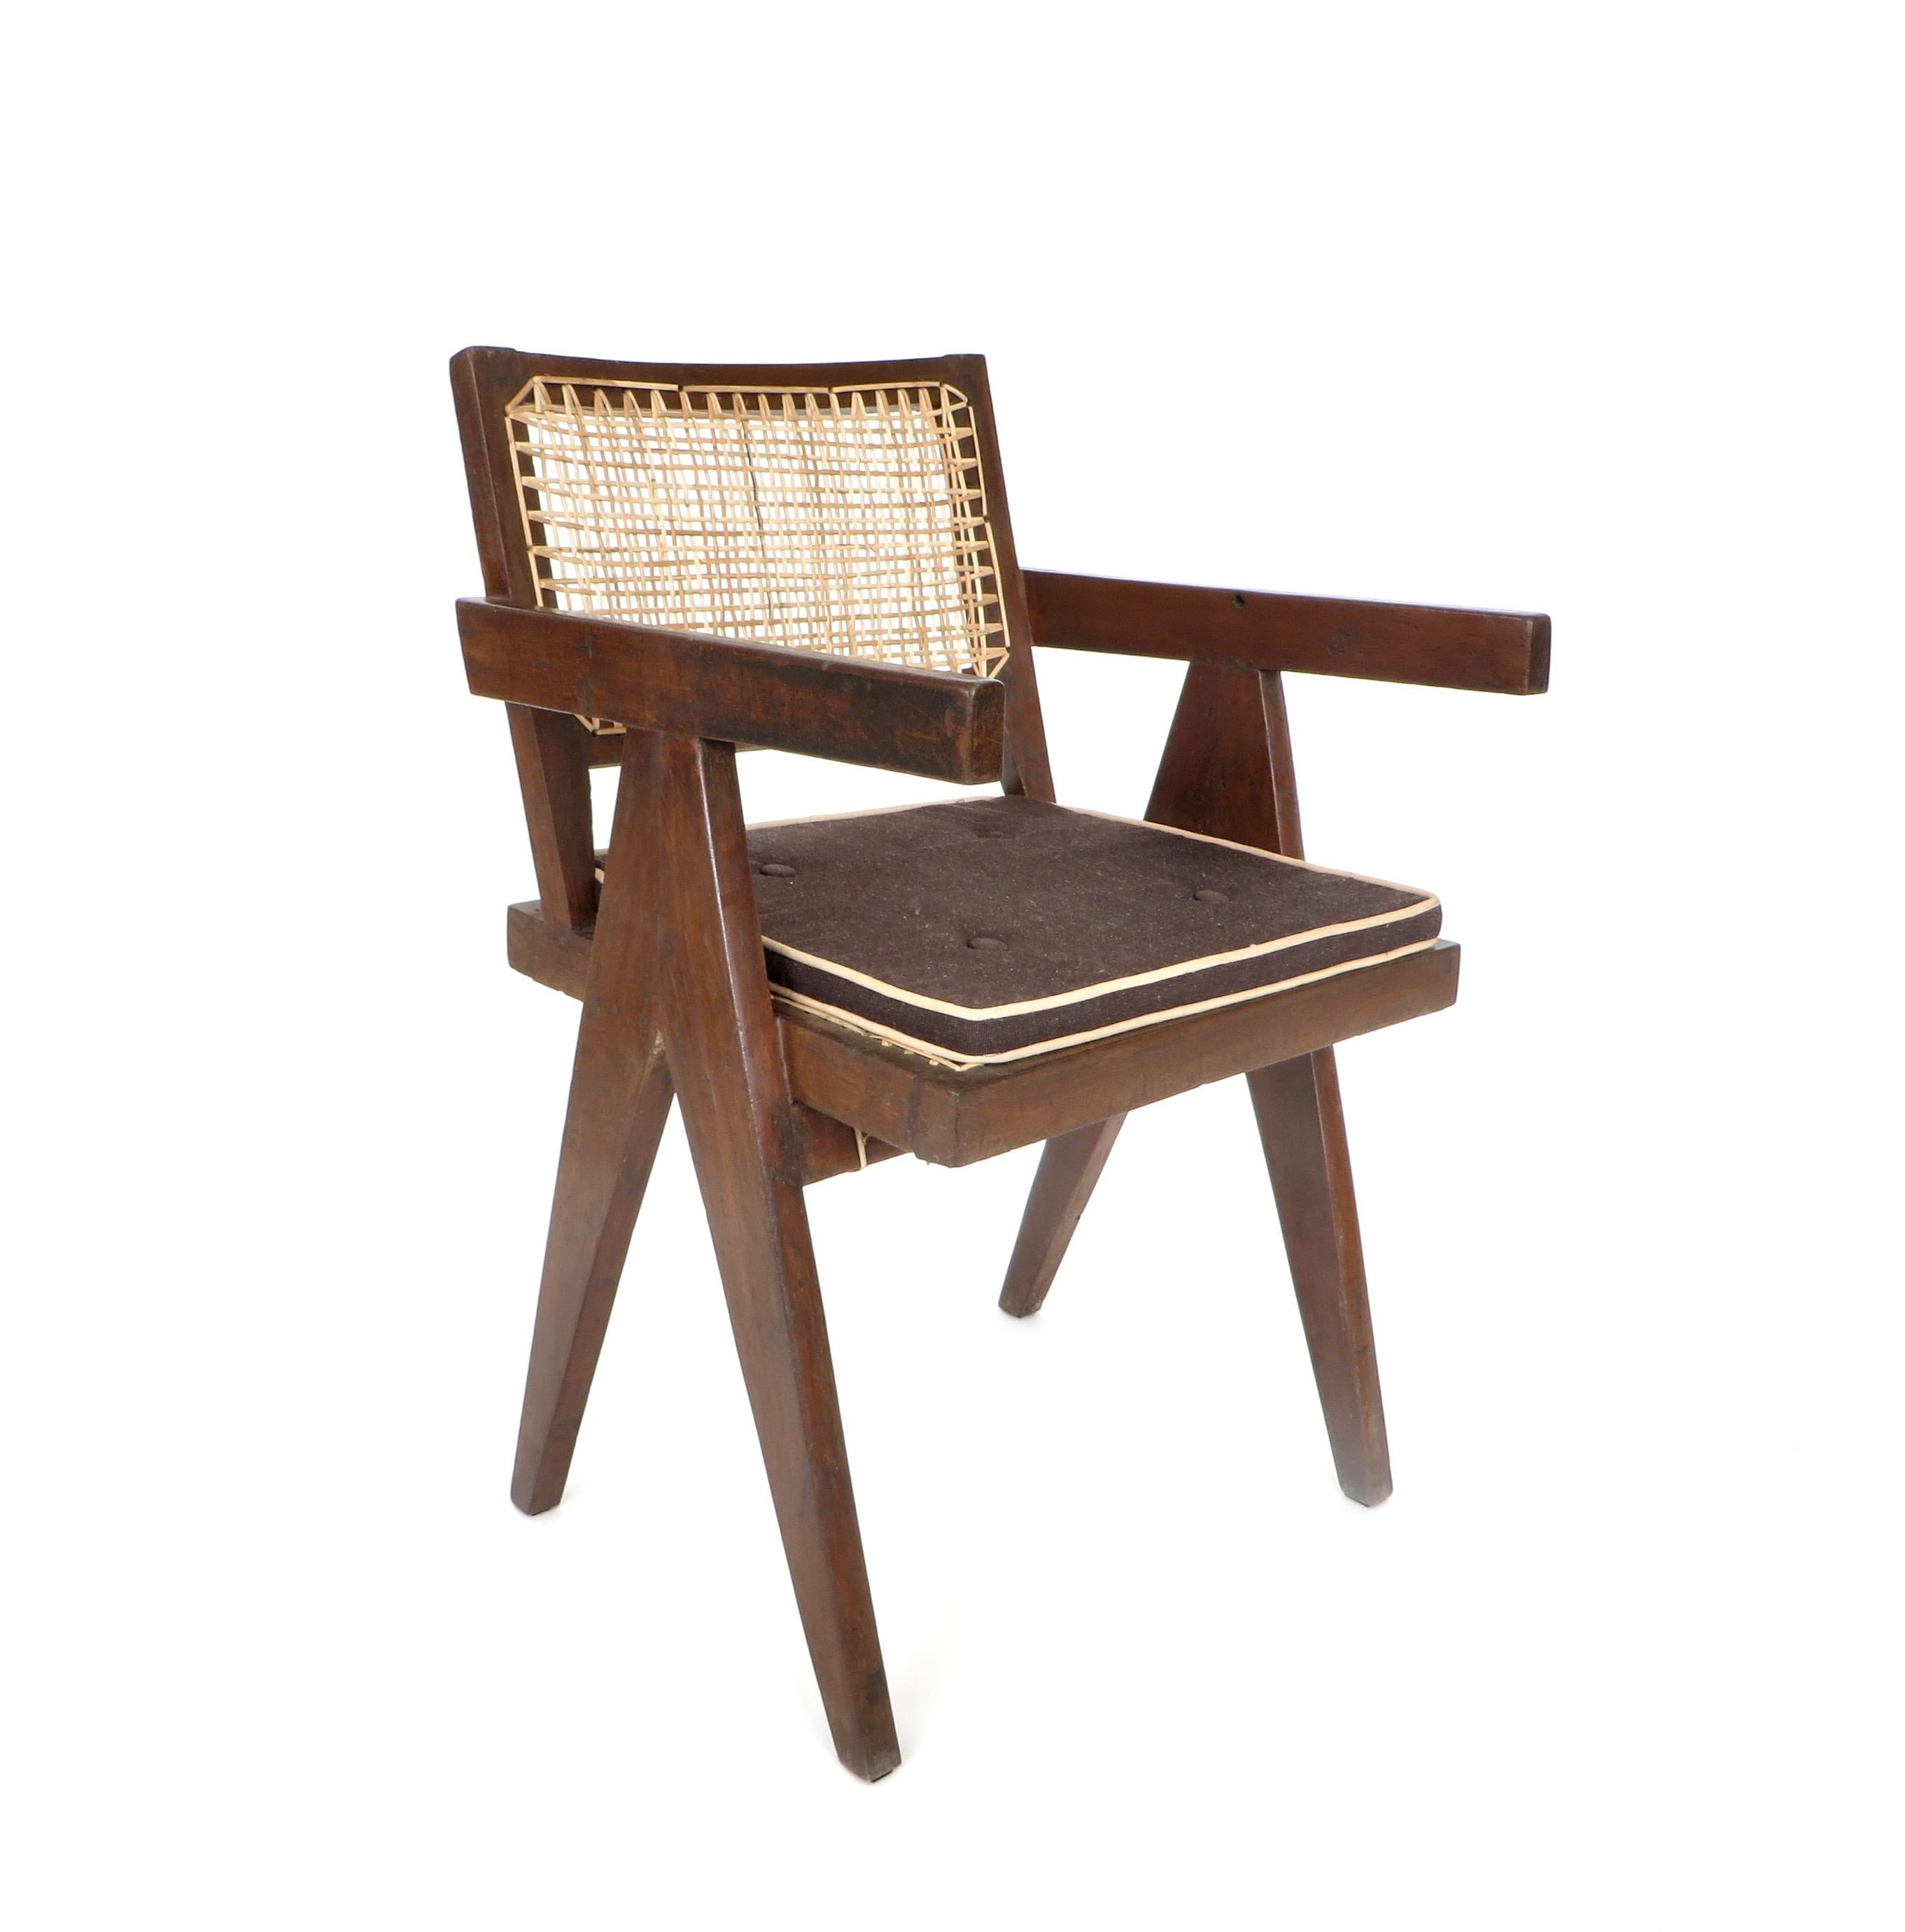 Mid-20th Century Pierre Jeanneret Teak and Cane Office Armchair From Chandigarh 